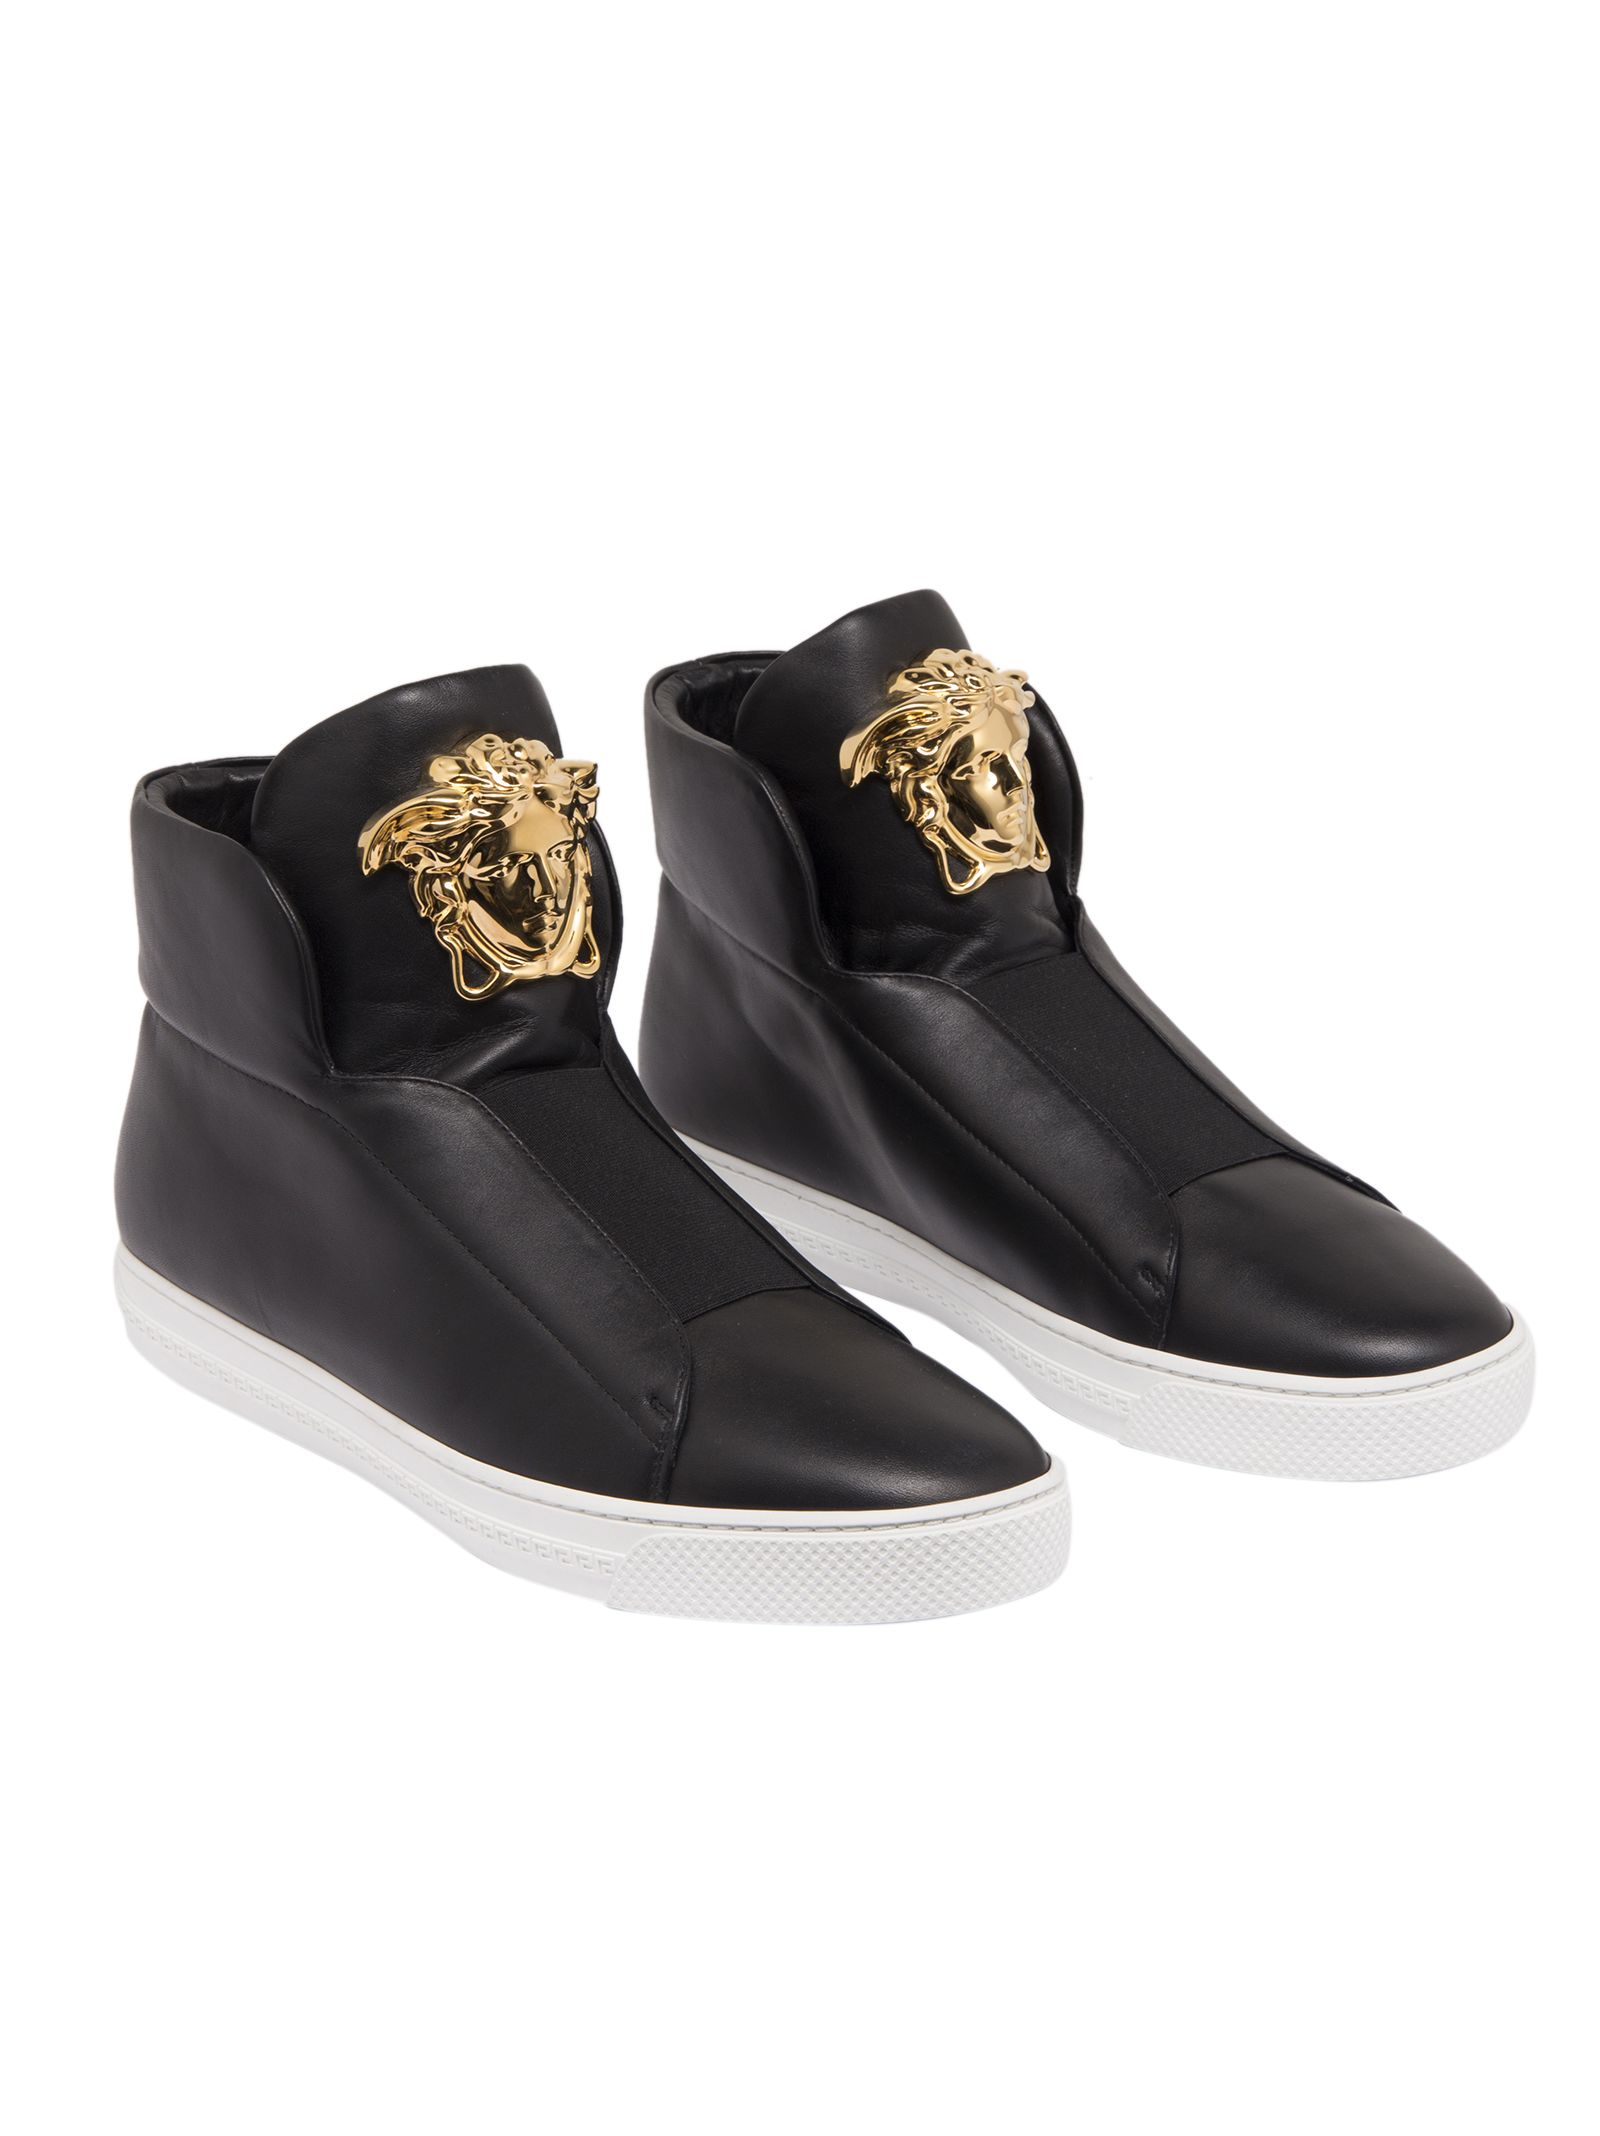 Versace - Gianni Versace Sneakers In Black Leather With Logo Versace ...